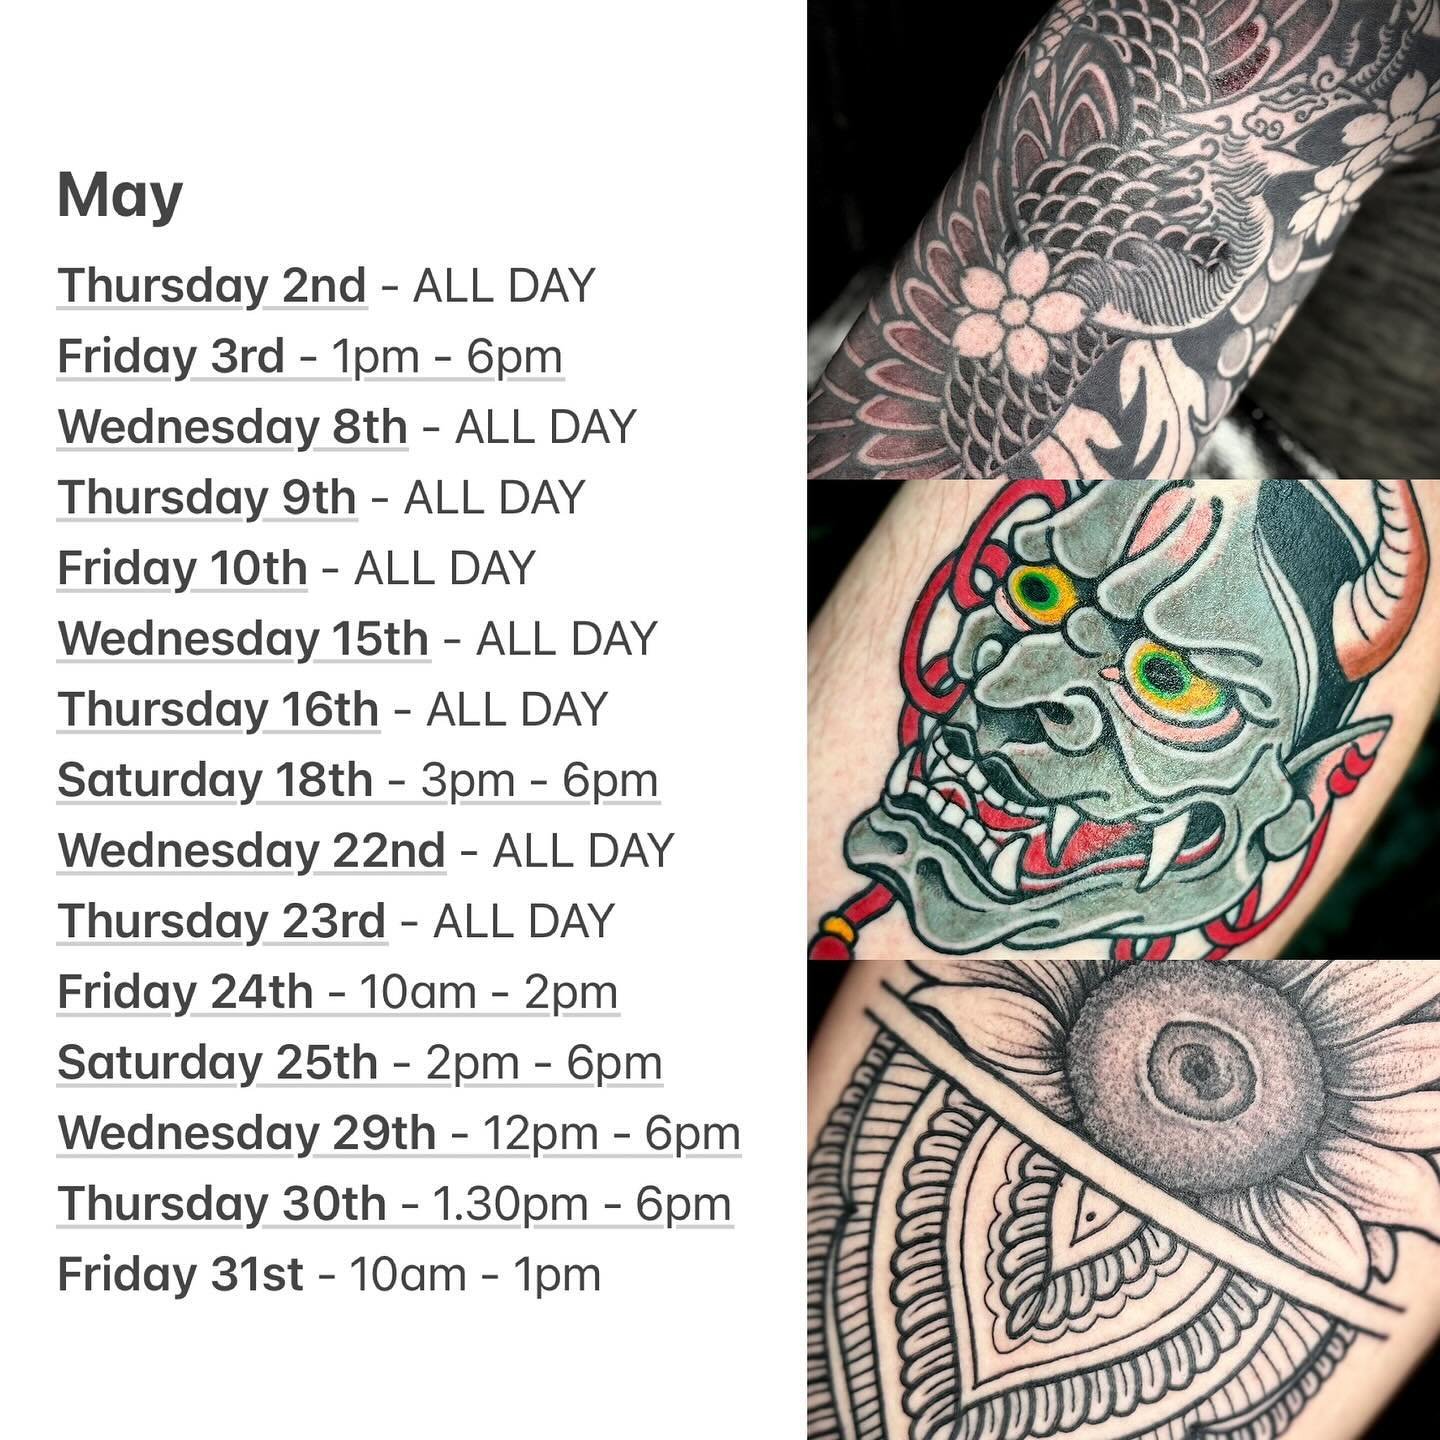 ***MAY AVAILABILITY***

Here&rsquo;s all my availability for May, DM / text me (button profile) if you wanted any, some or a portion of any of these days!

Don&rsquo;t forget I&rsquo;m also offering flexible payment plans, to find out about that get 